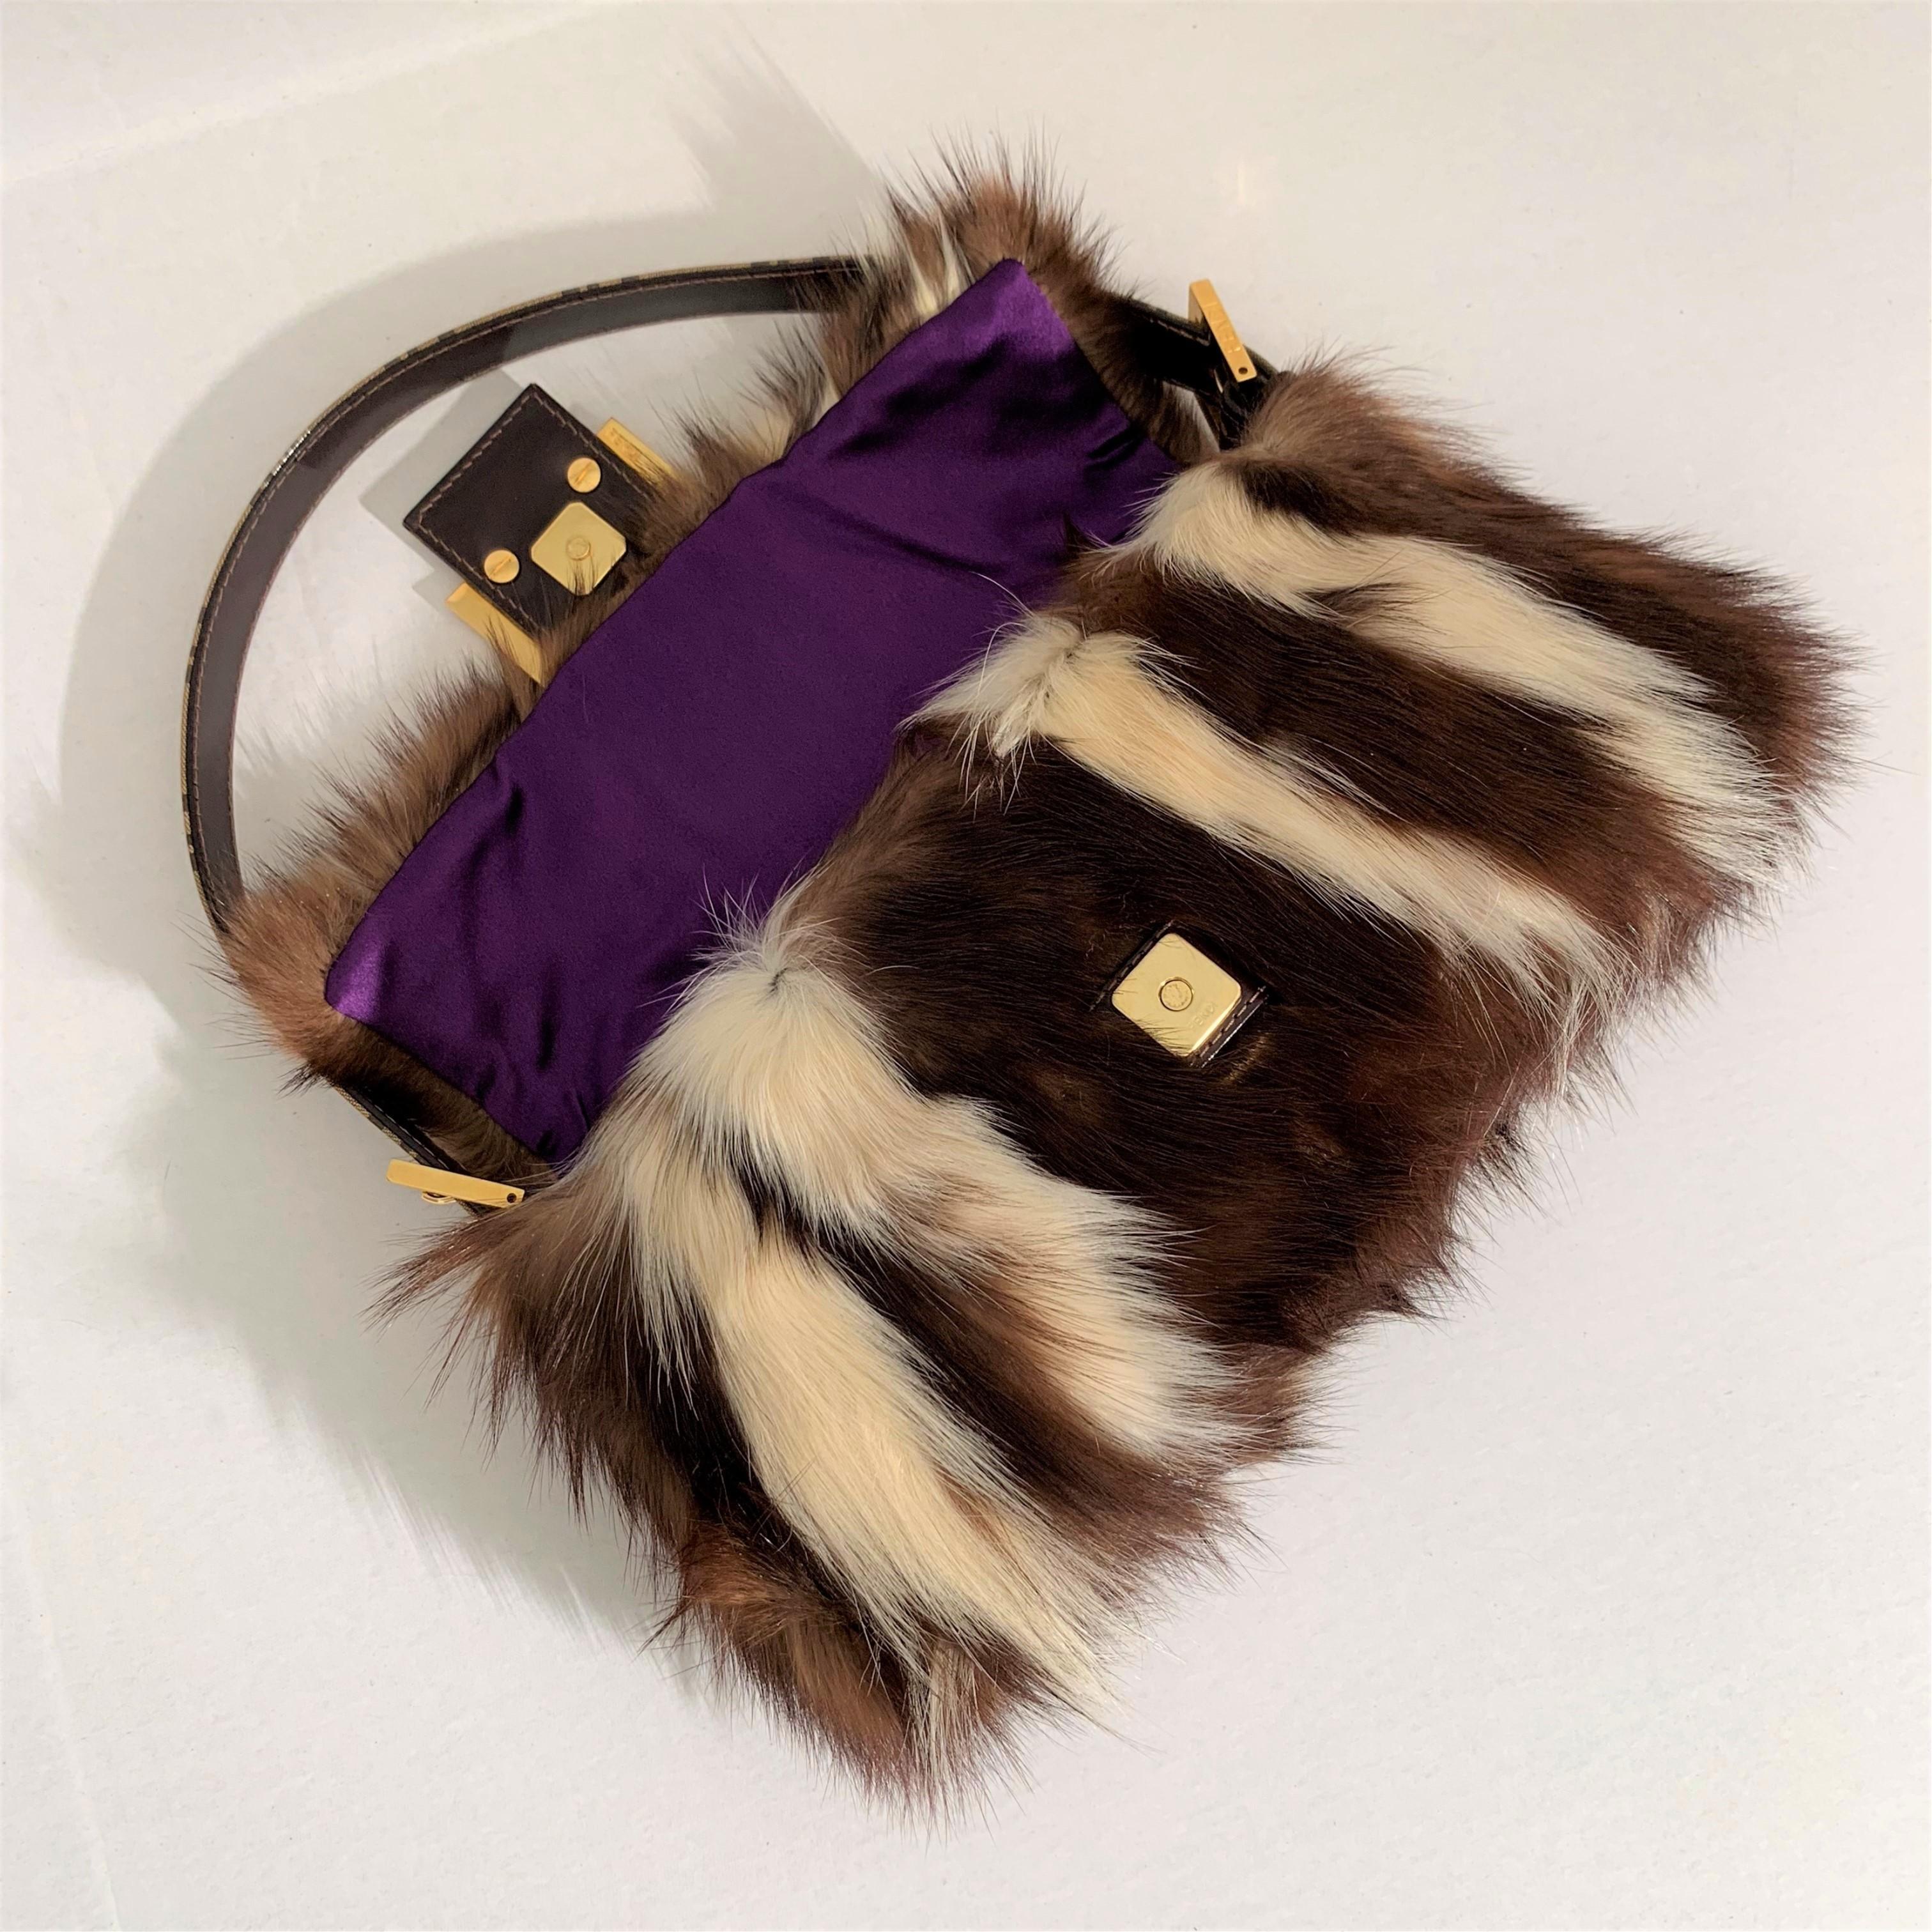 New Rare Fendi Fur Baguette Bag Featured in the 15th Anniversary Book Lt Edition 9